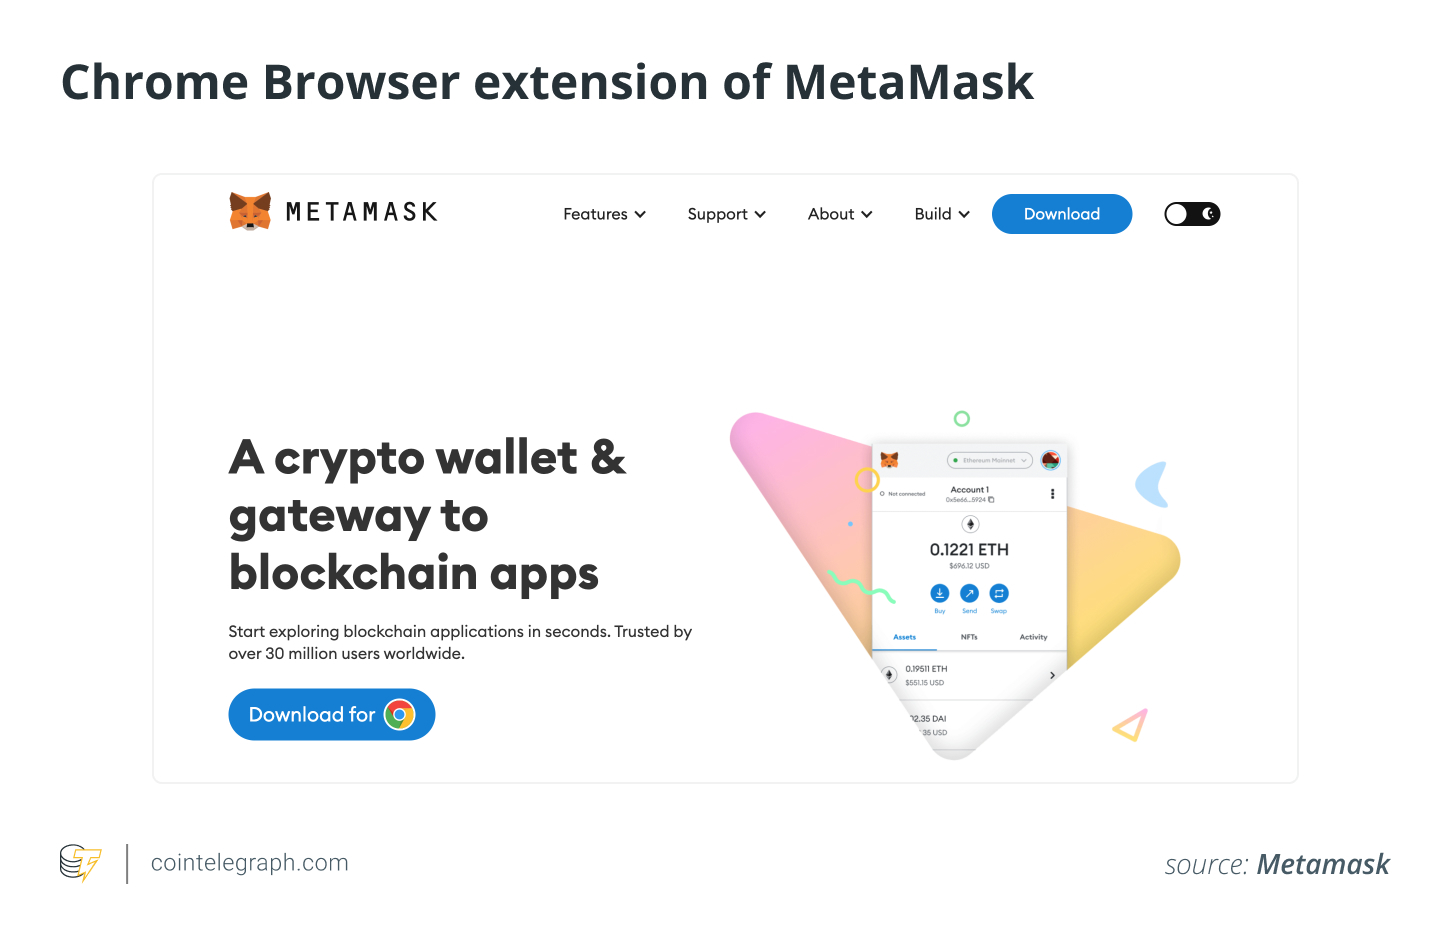 Chrome Browser extension of MetaMask